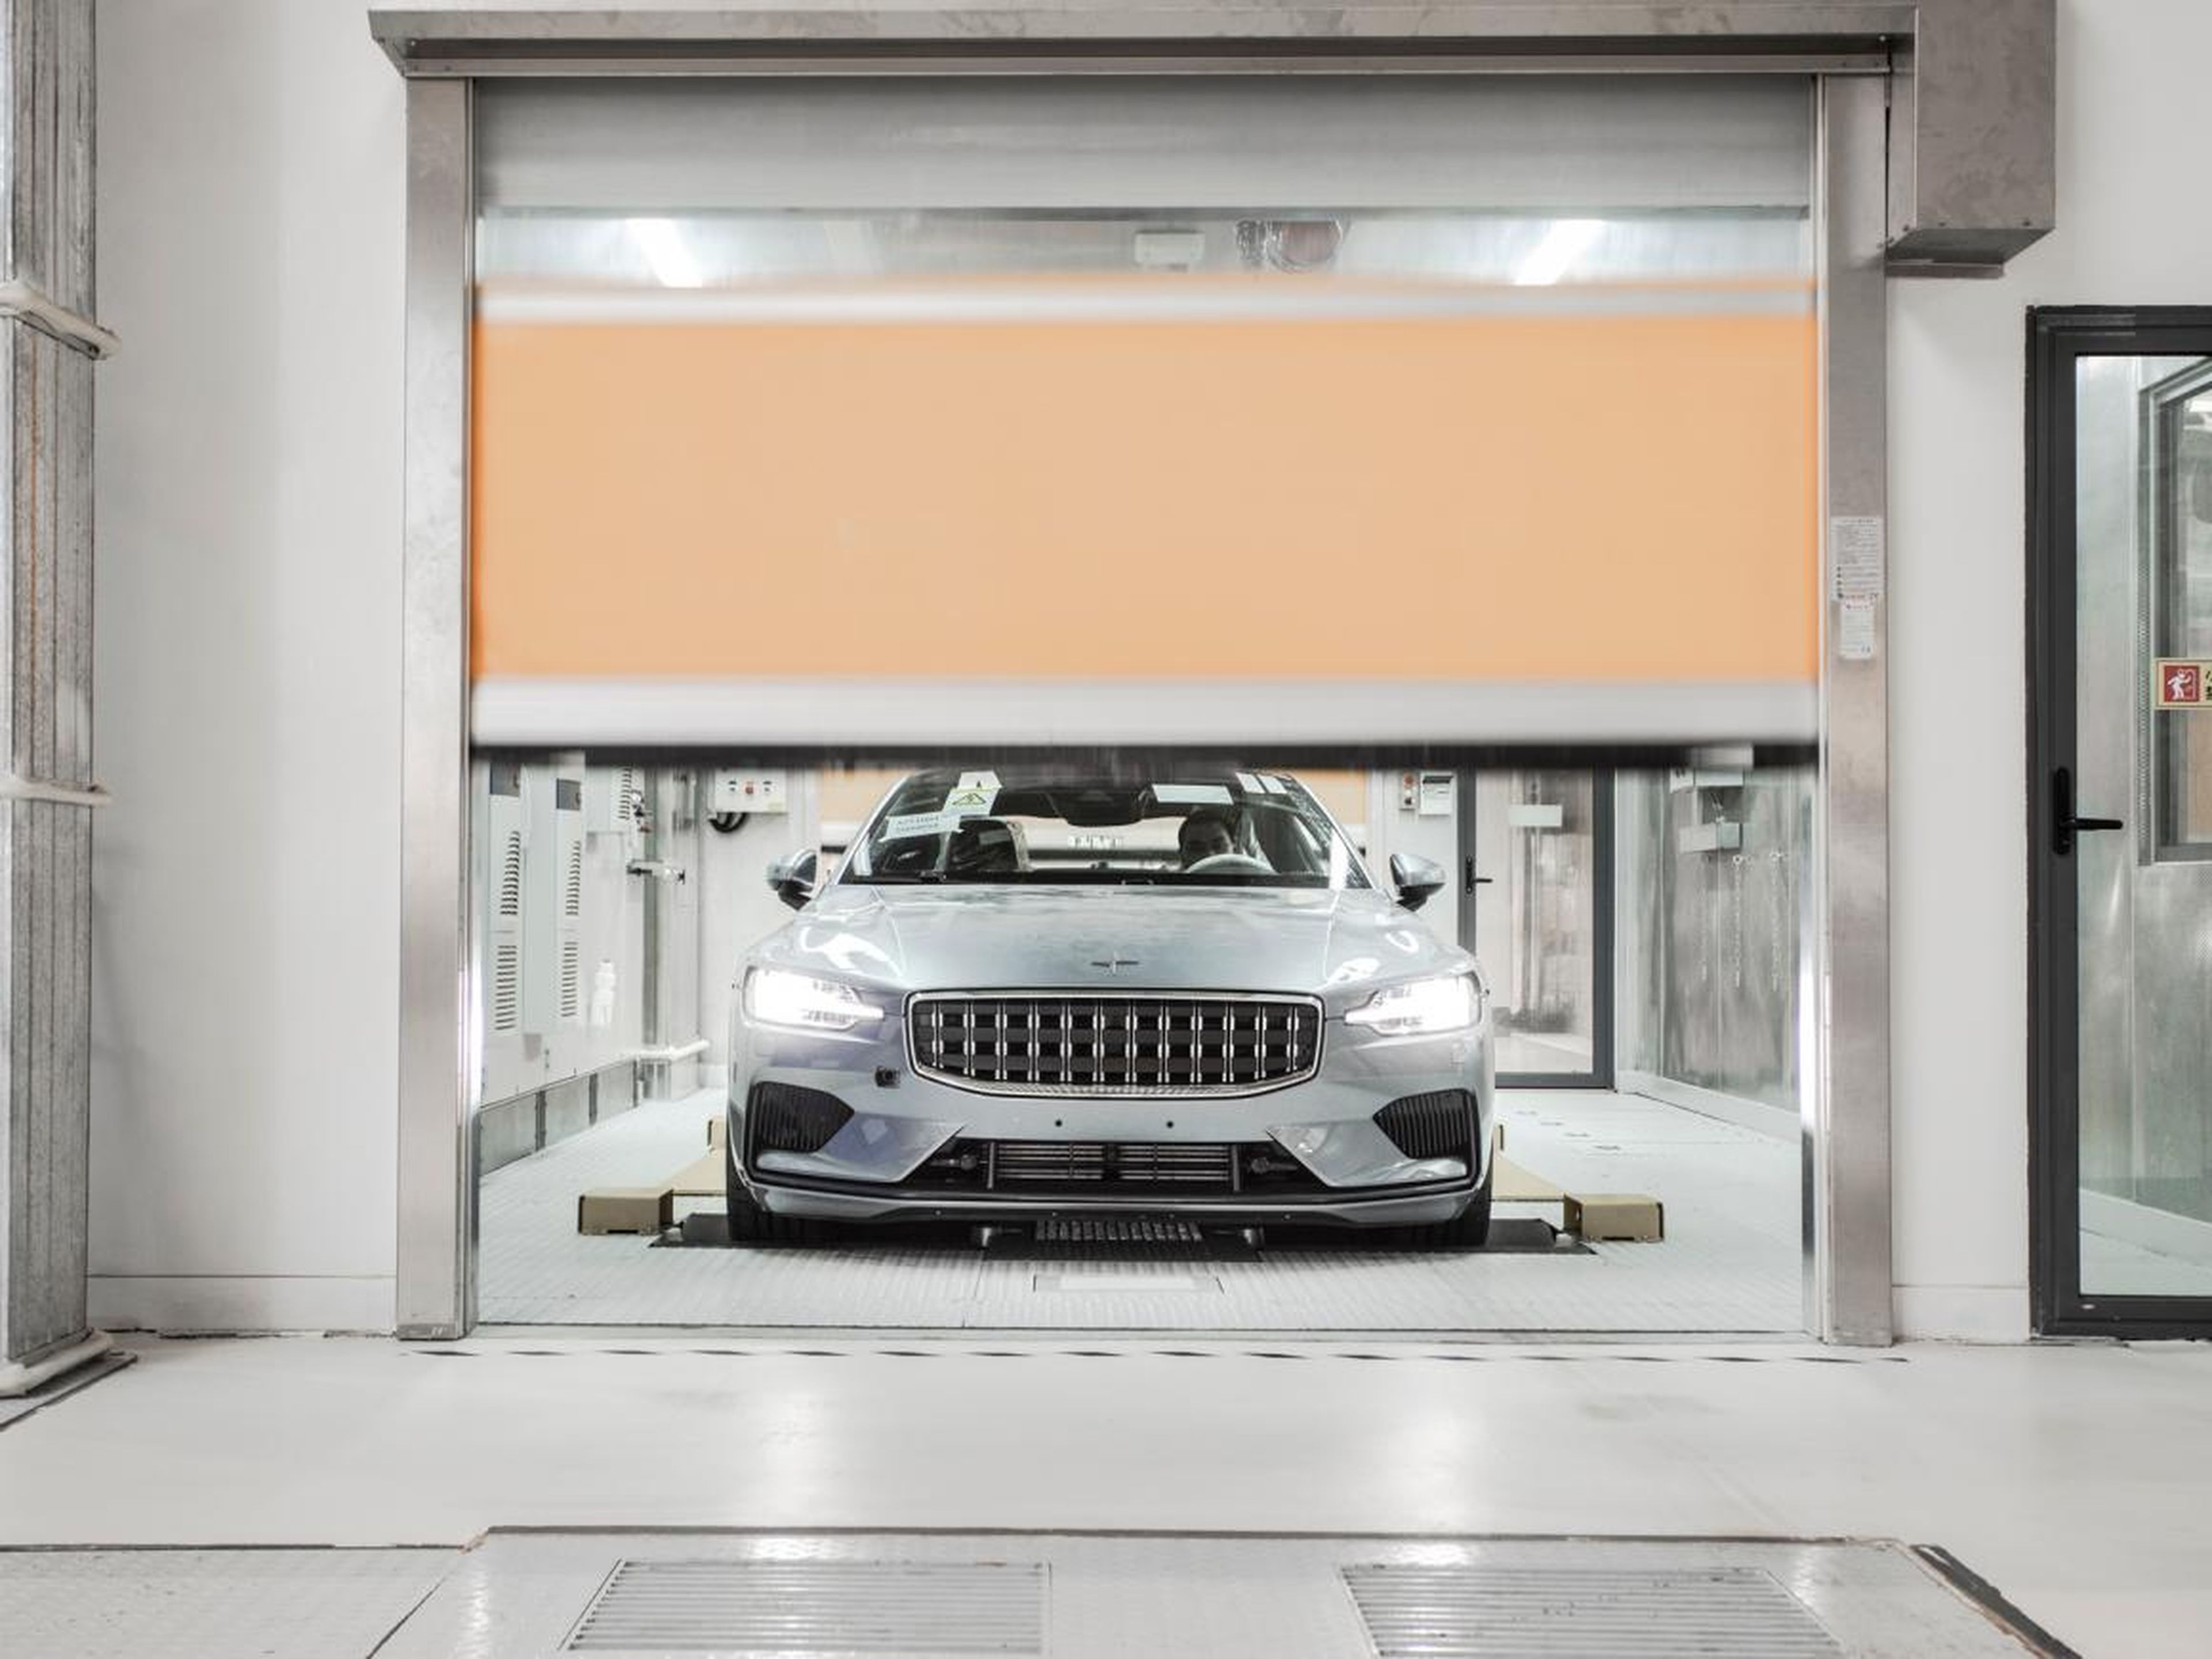 Polestar 3 is already being planned and is set to be a fully-electric performance SUV.